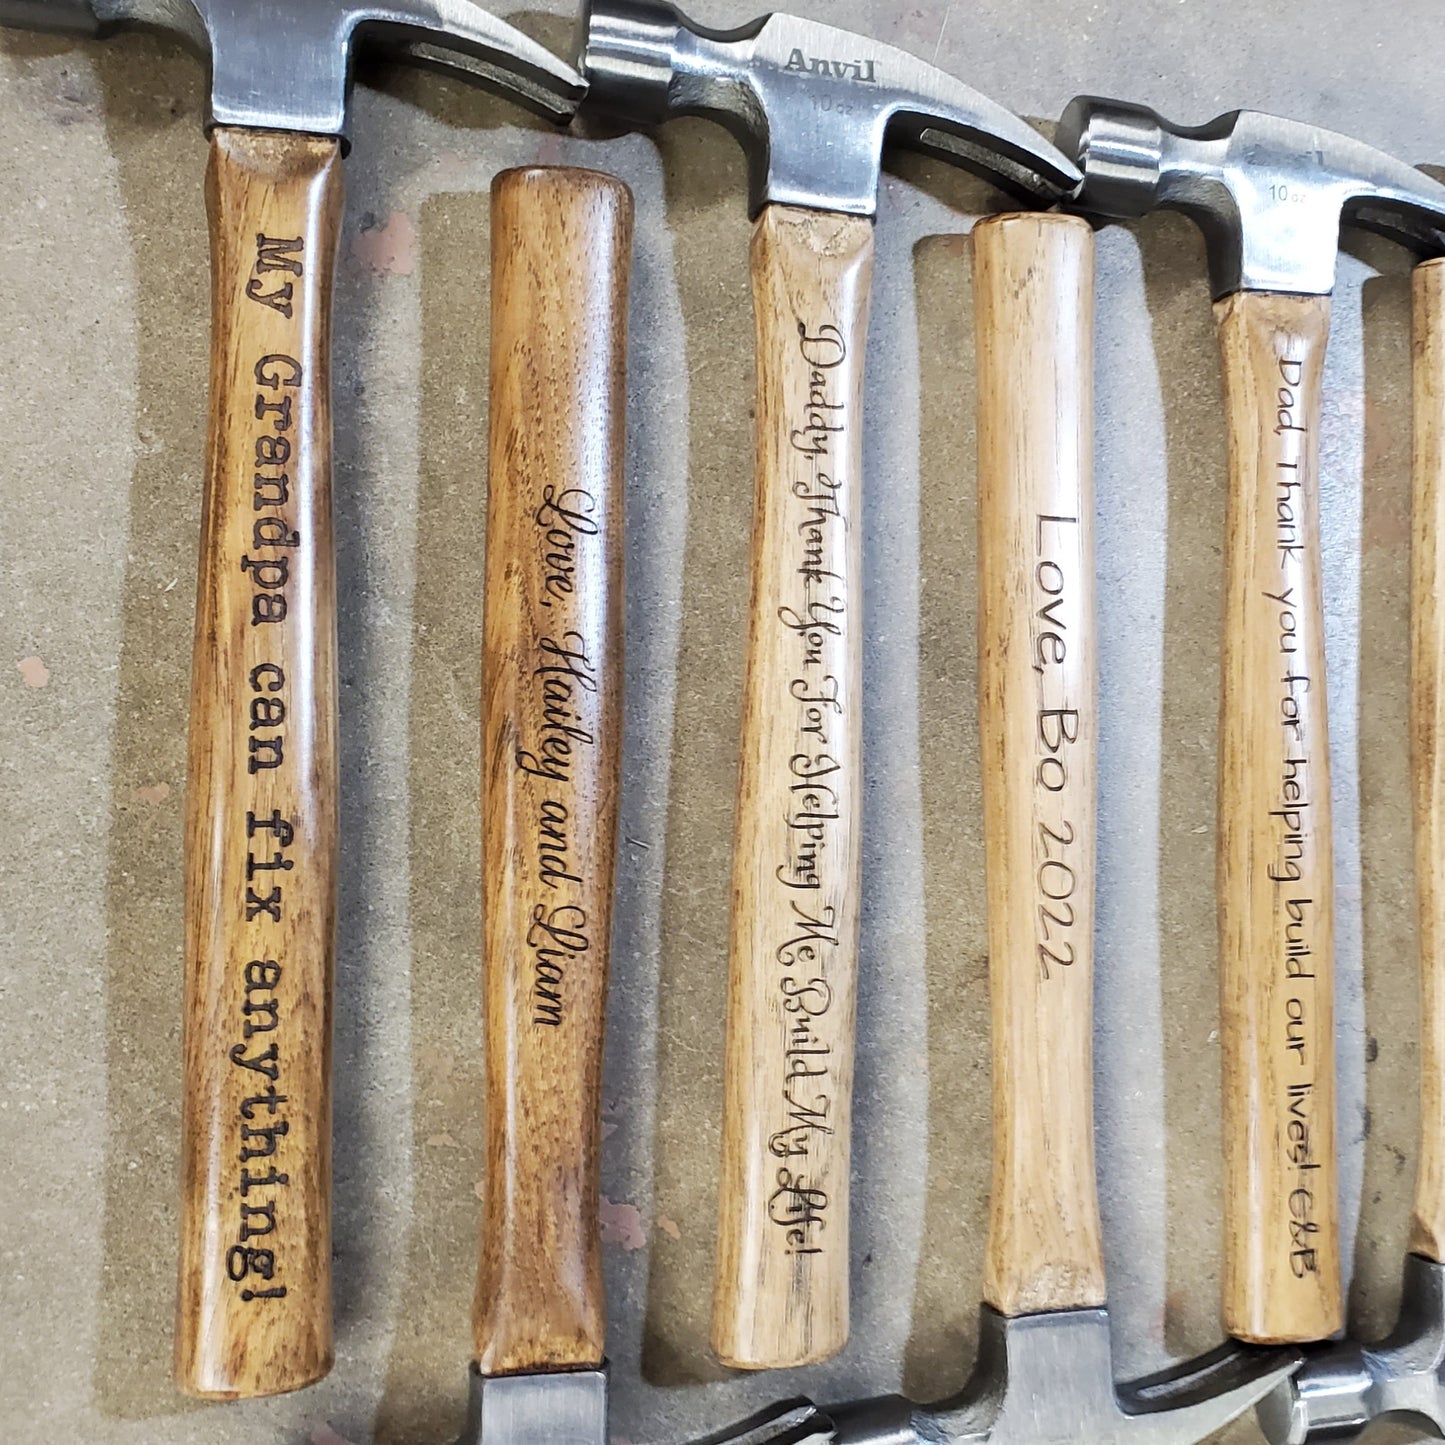 Engraved Hammer - Personalized Hammer with your quote or names